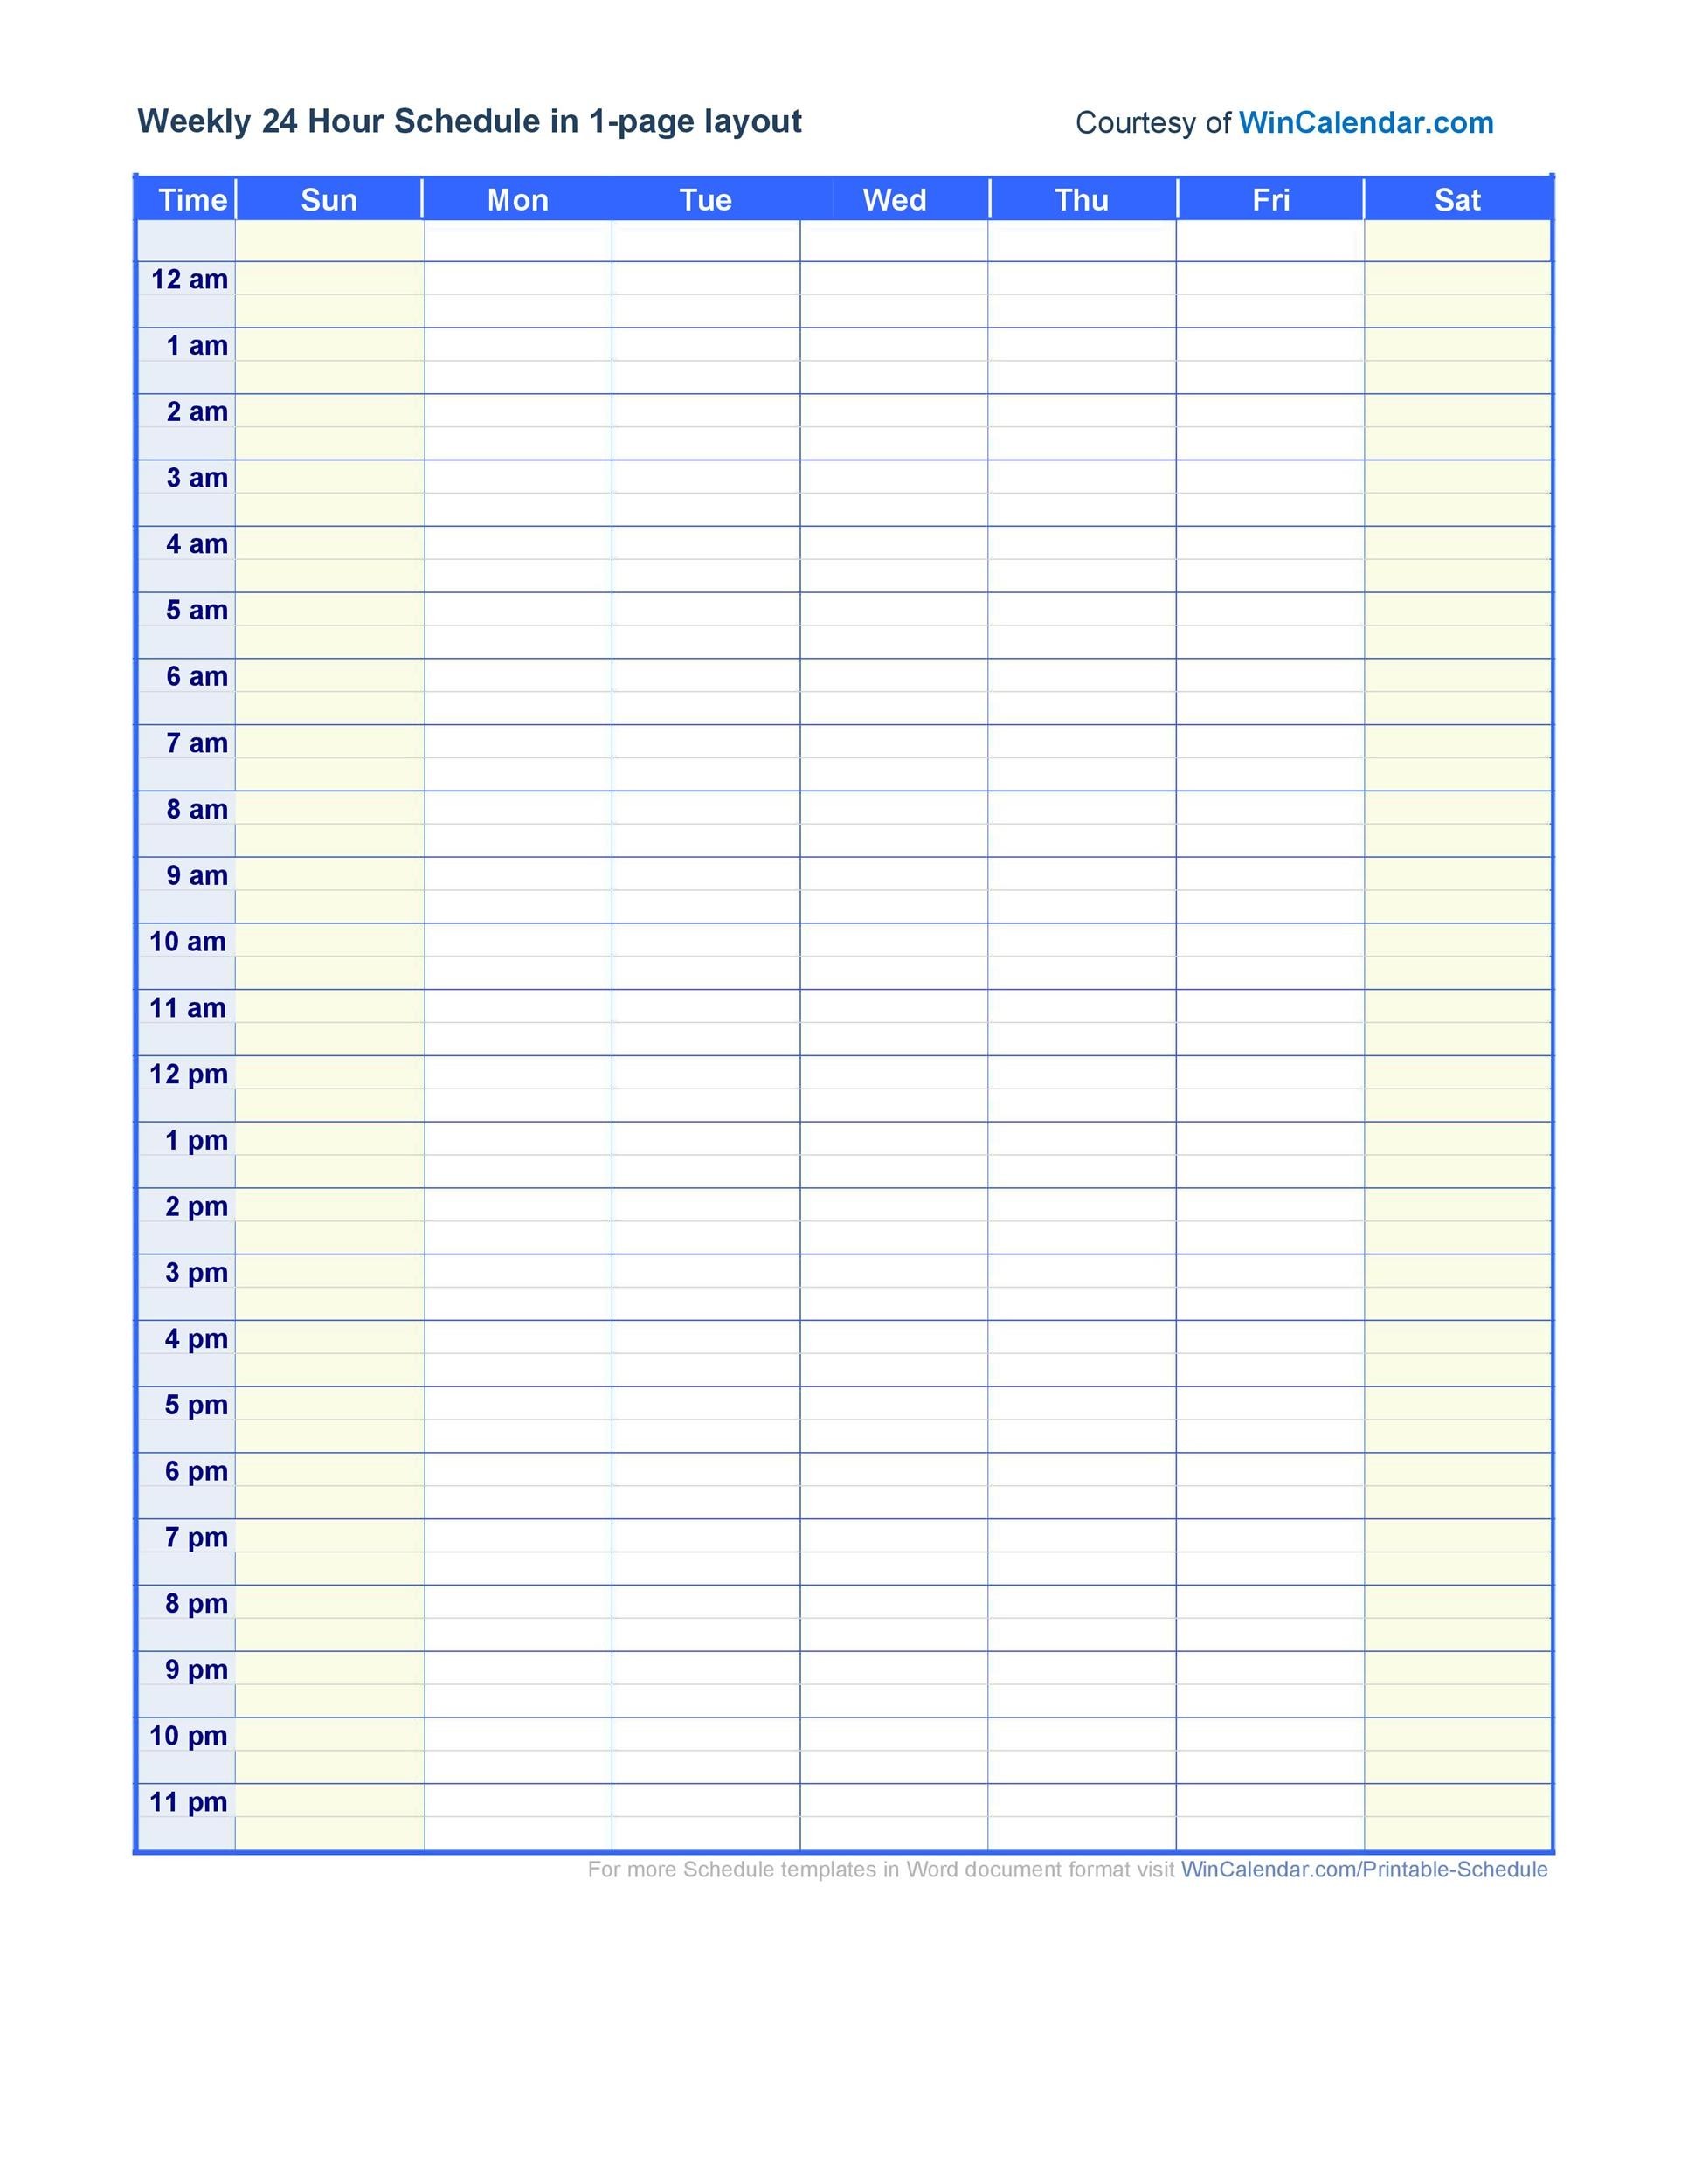 Weekly Hourly Planner Template Excel from templatelab.com